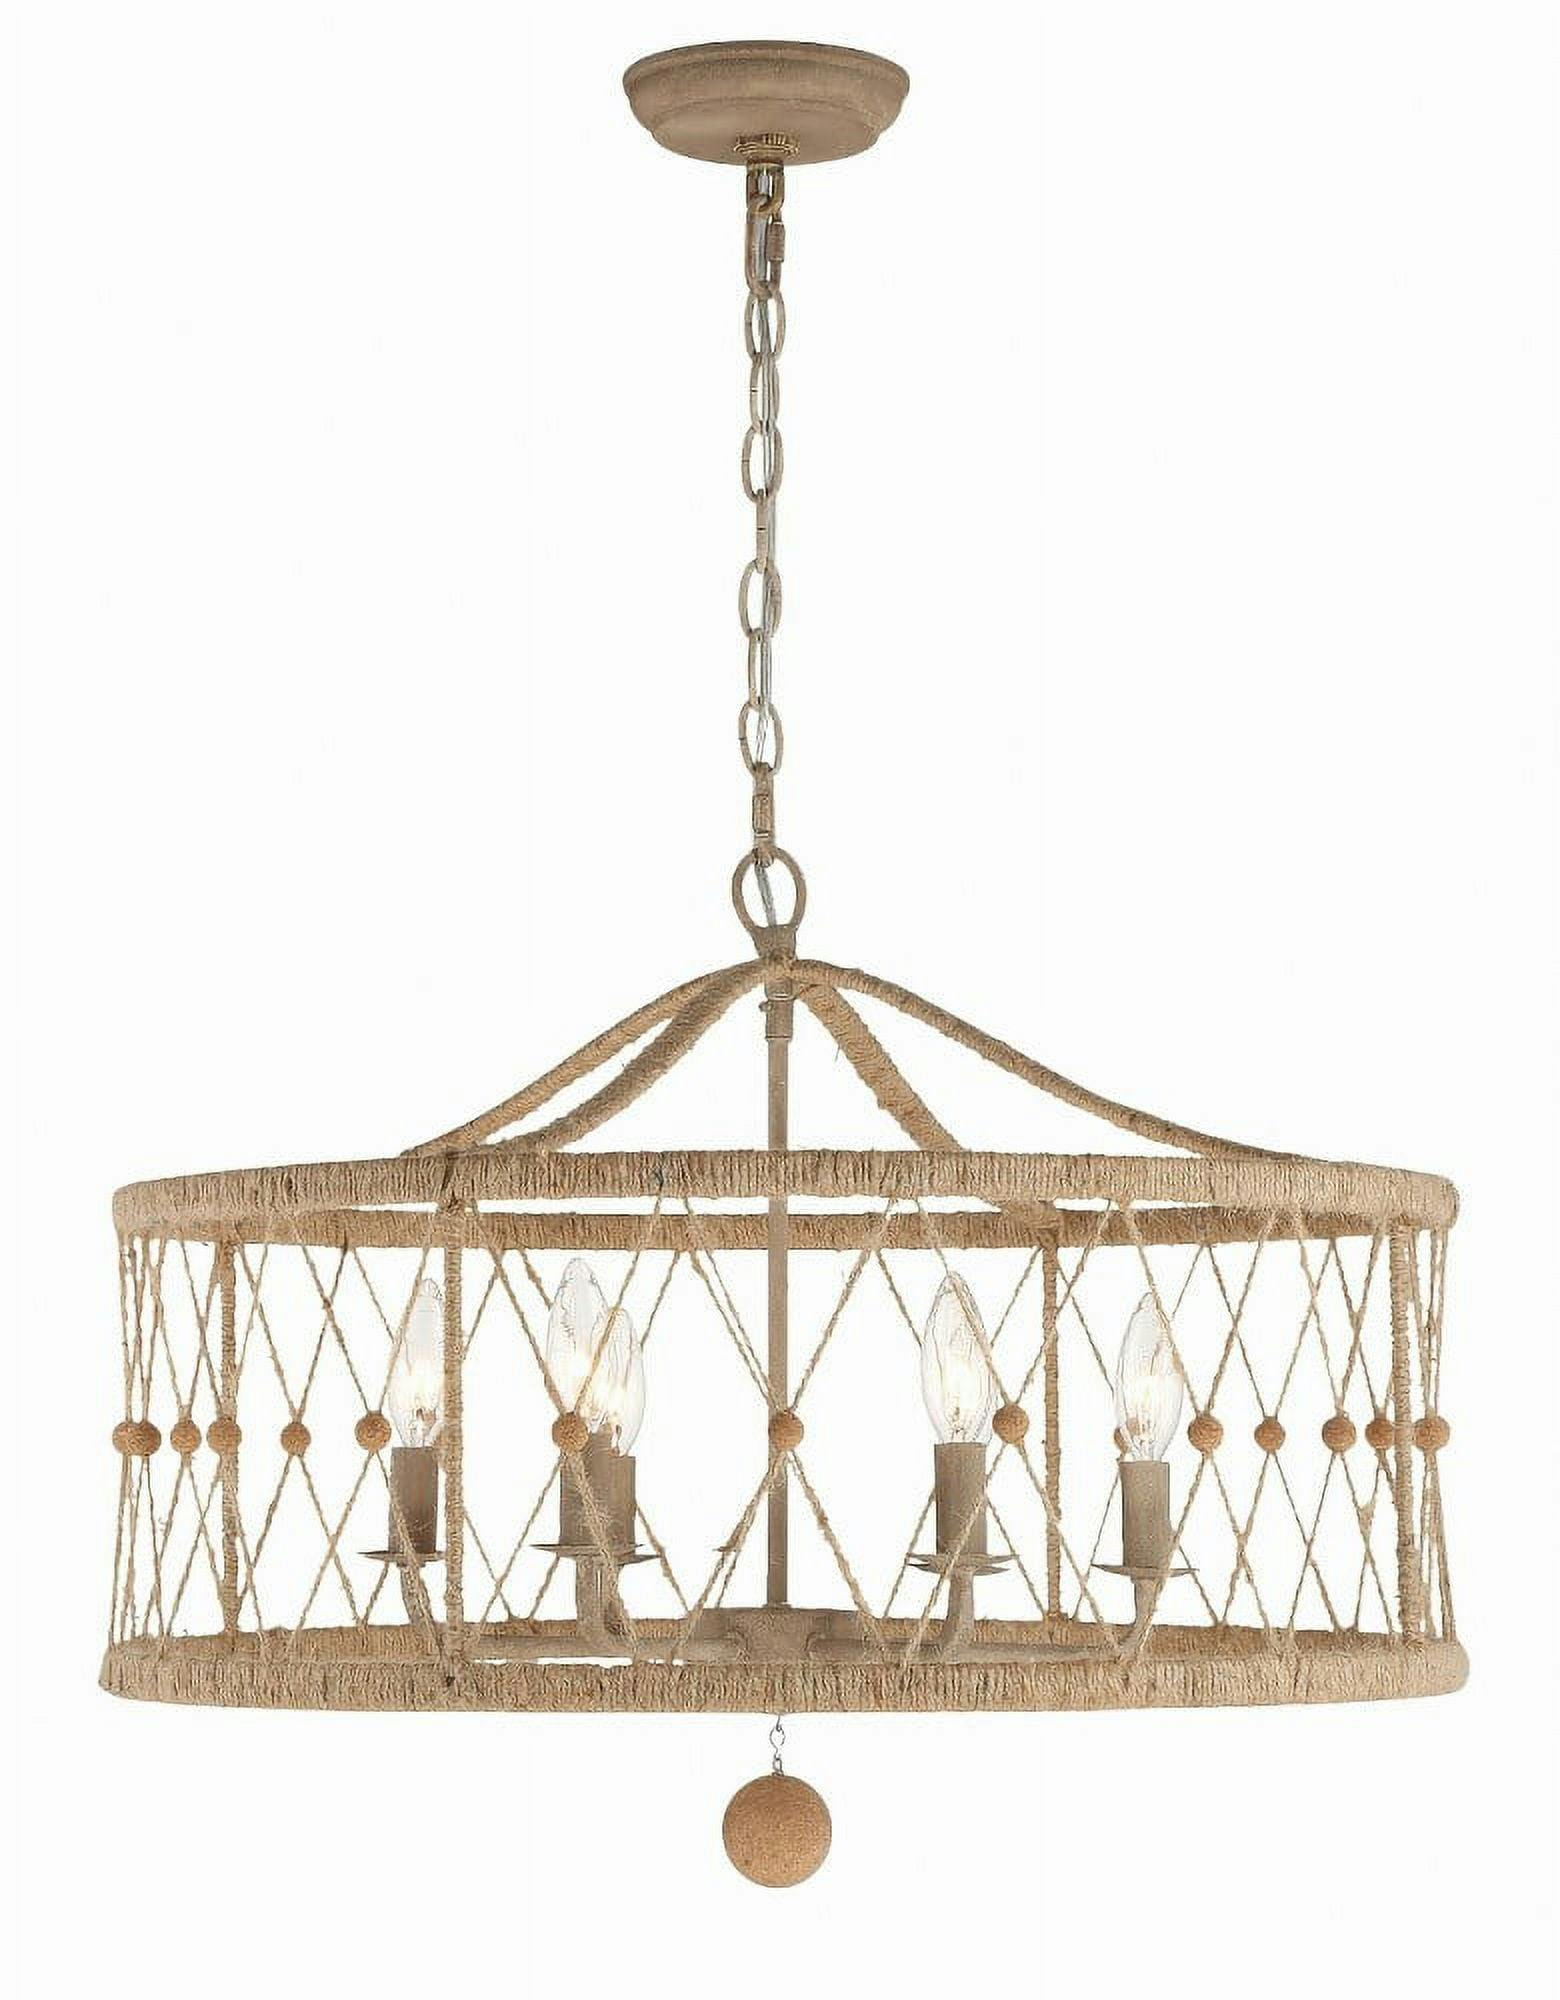 Brixton 6-Light Burnished Silver Drum Chandelier with Jute Accents